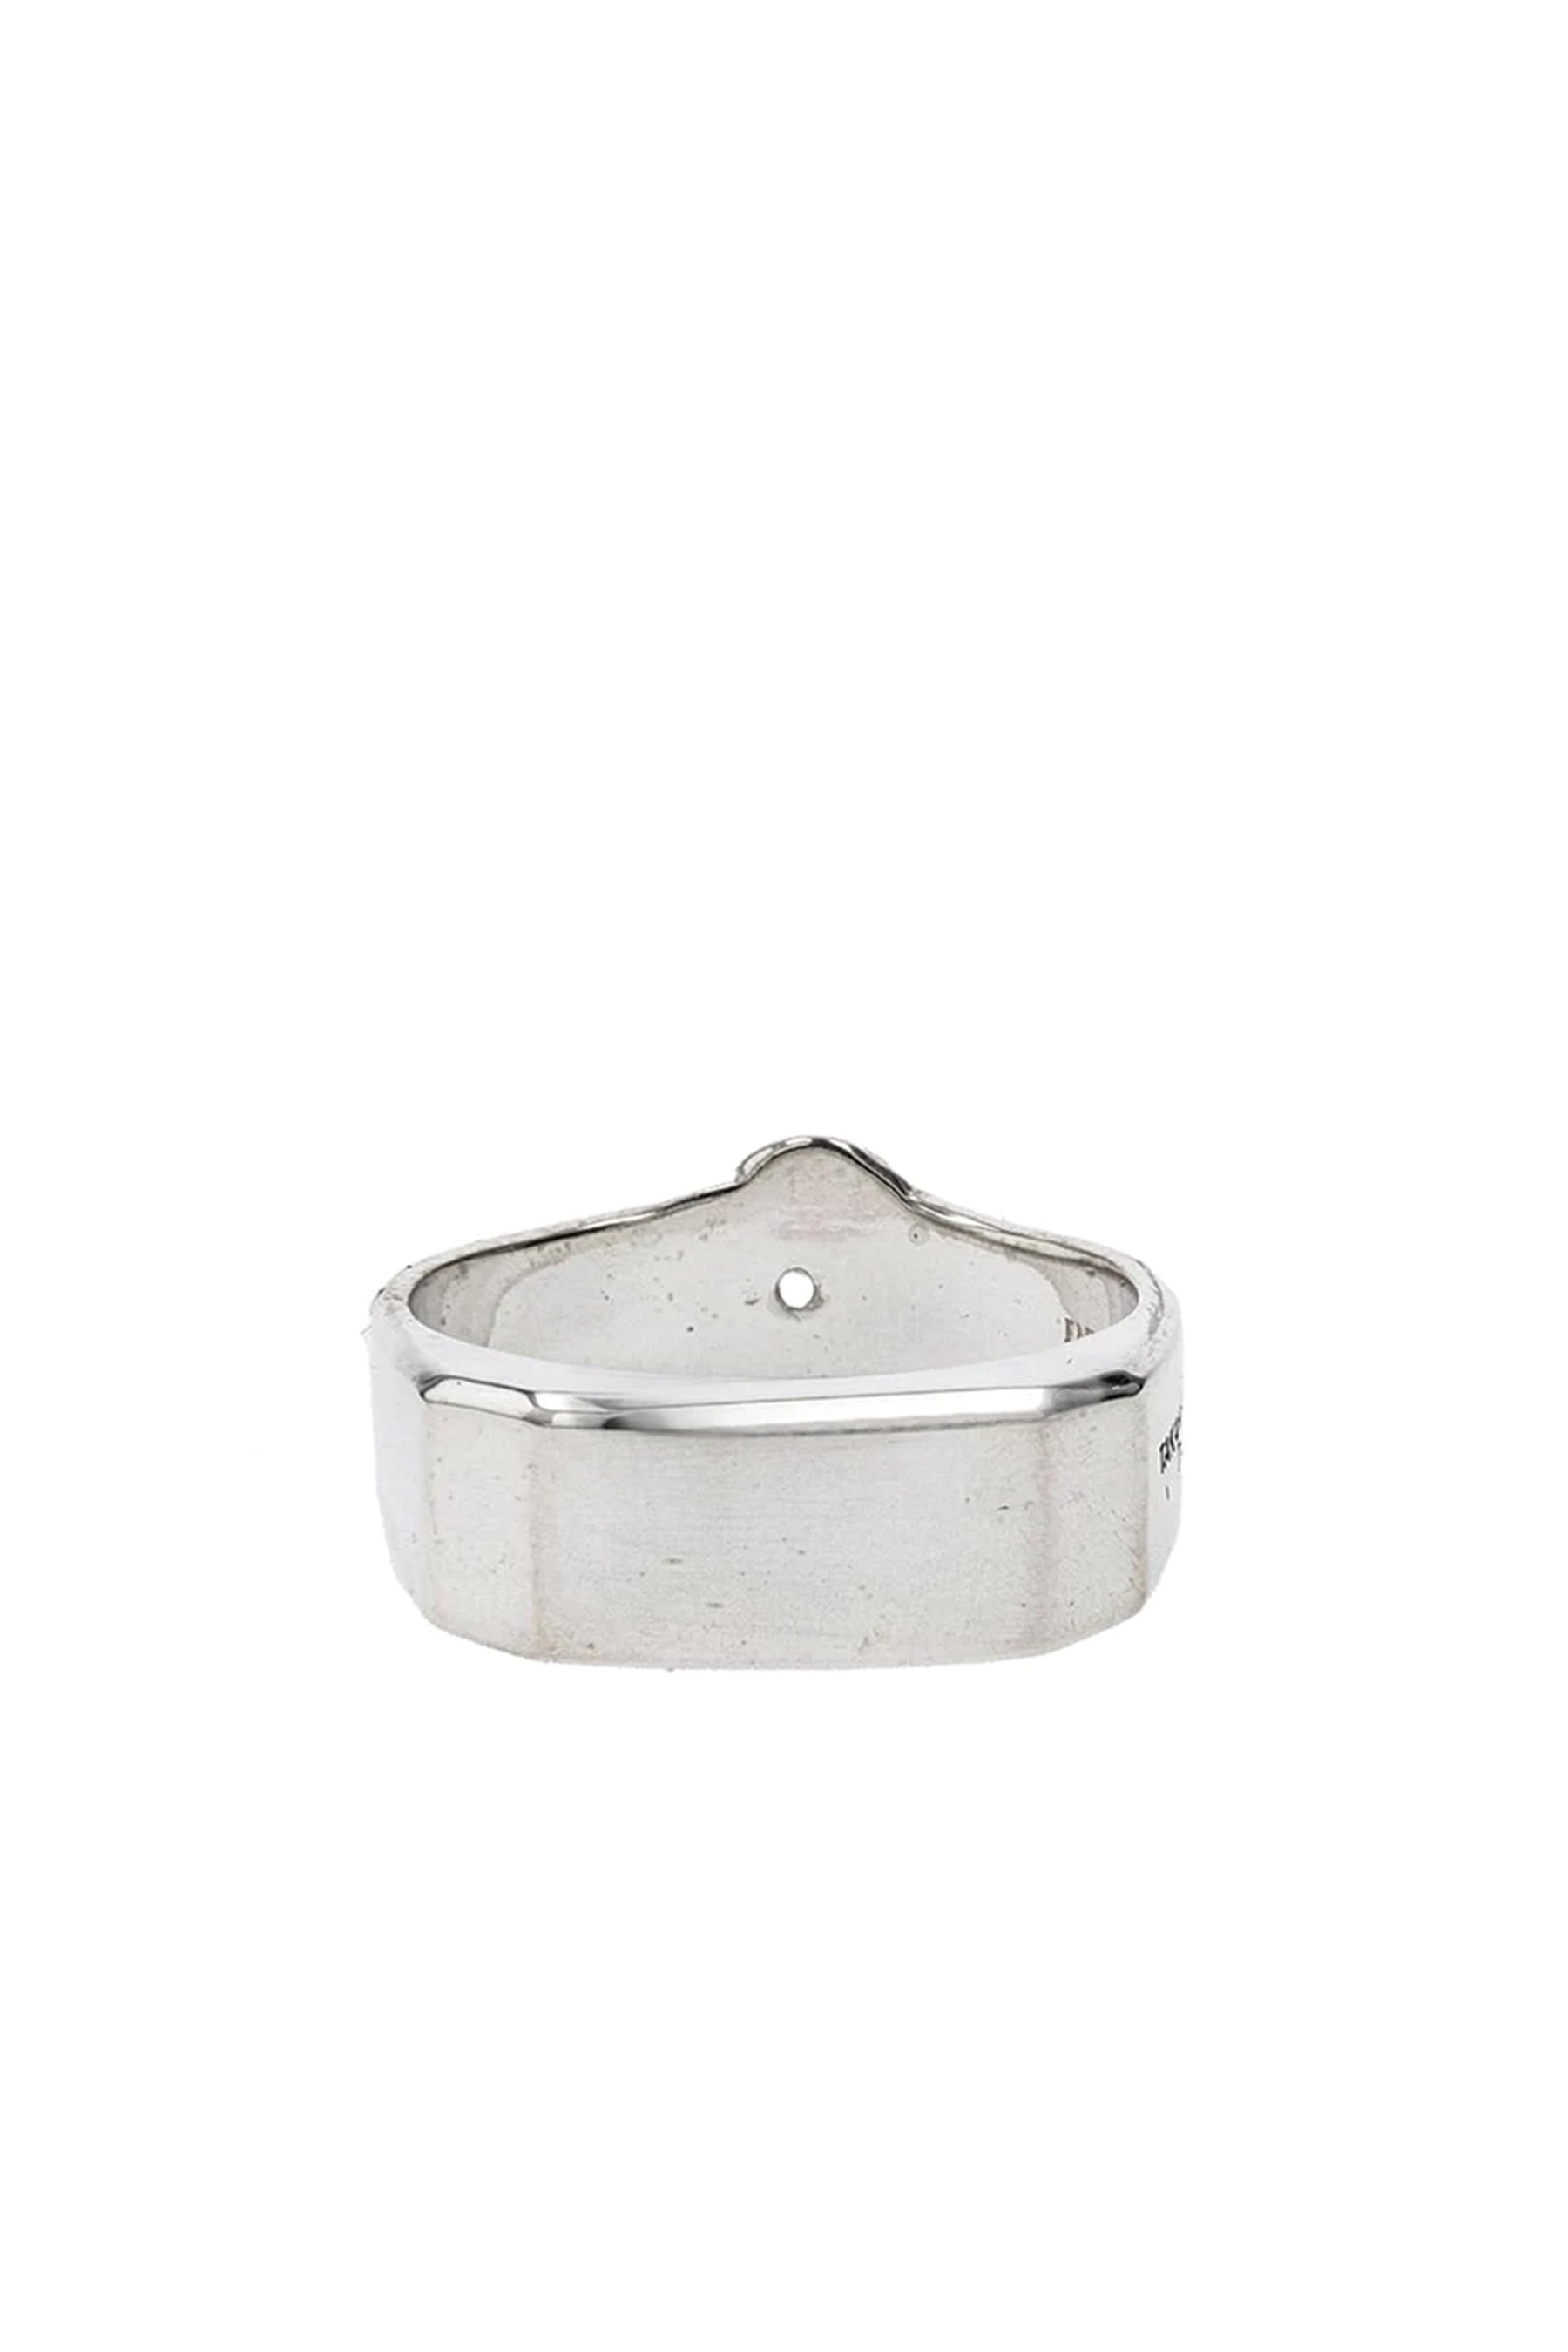 BORN SHAPED SIGNET RING.-S- / SIL